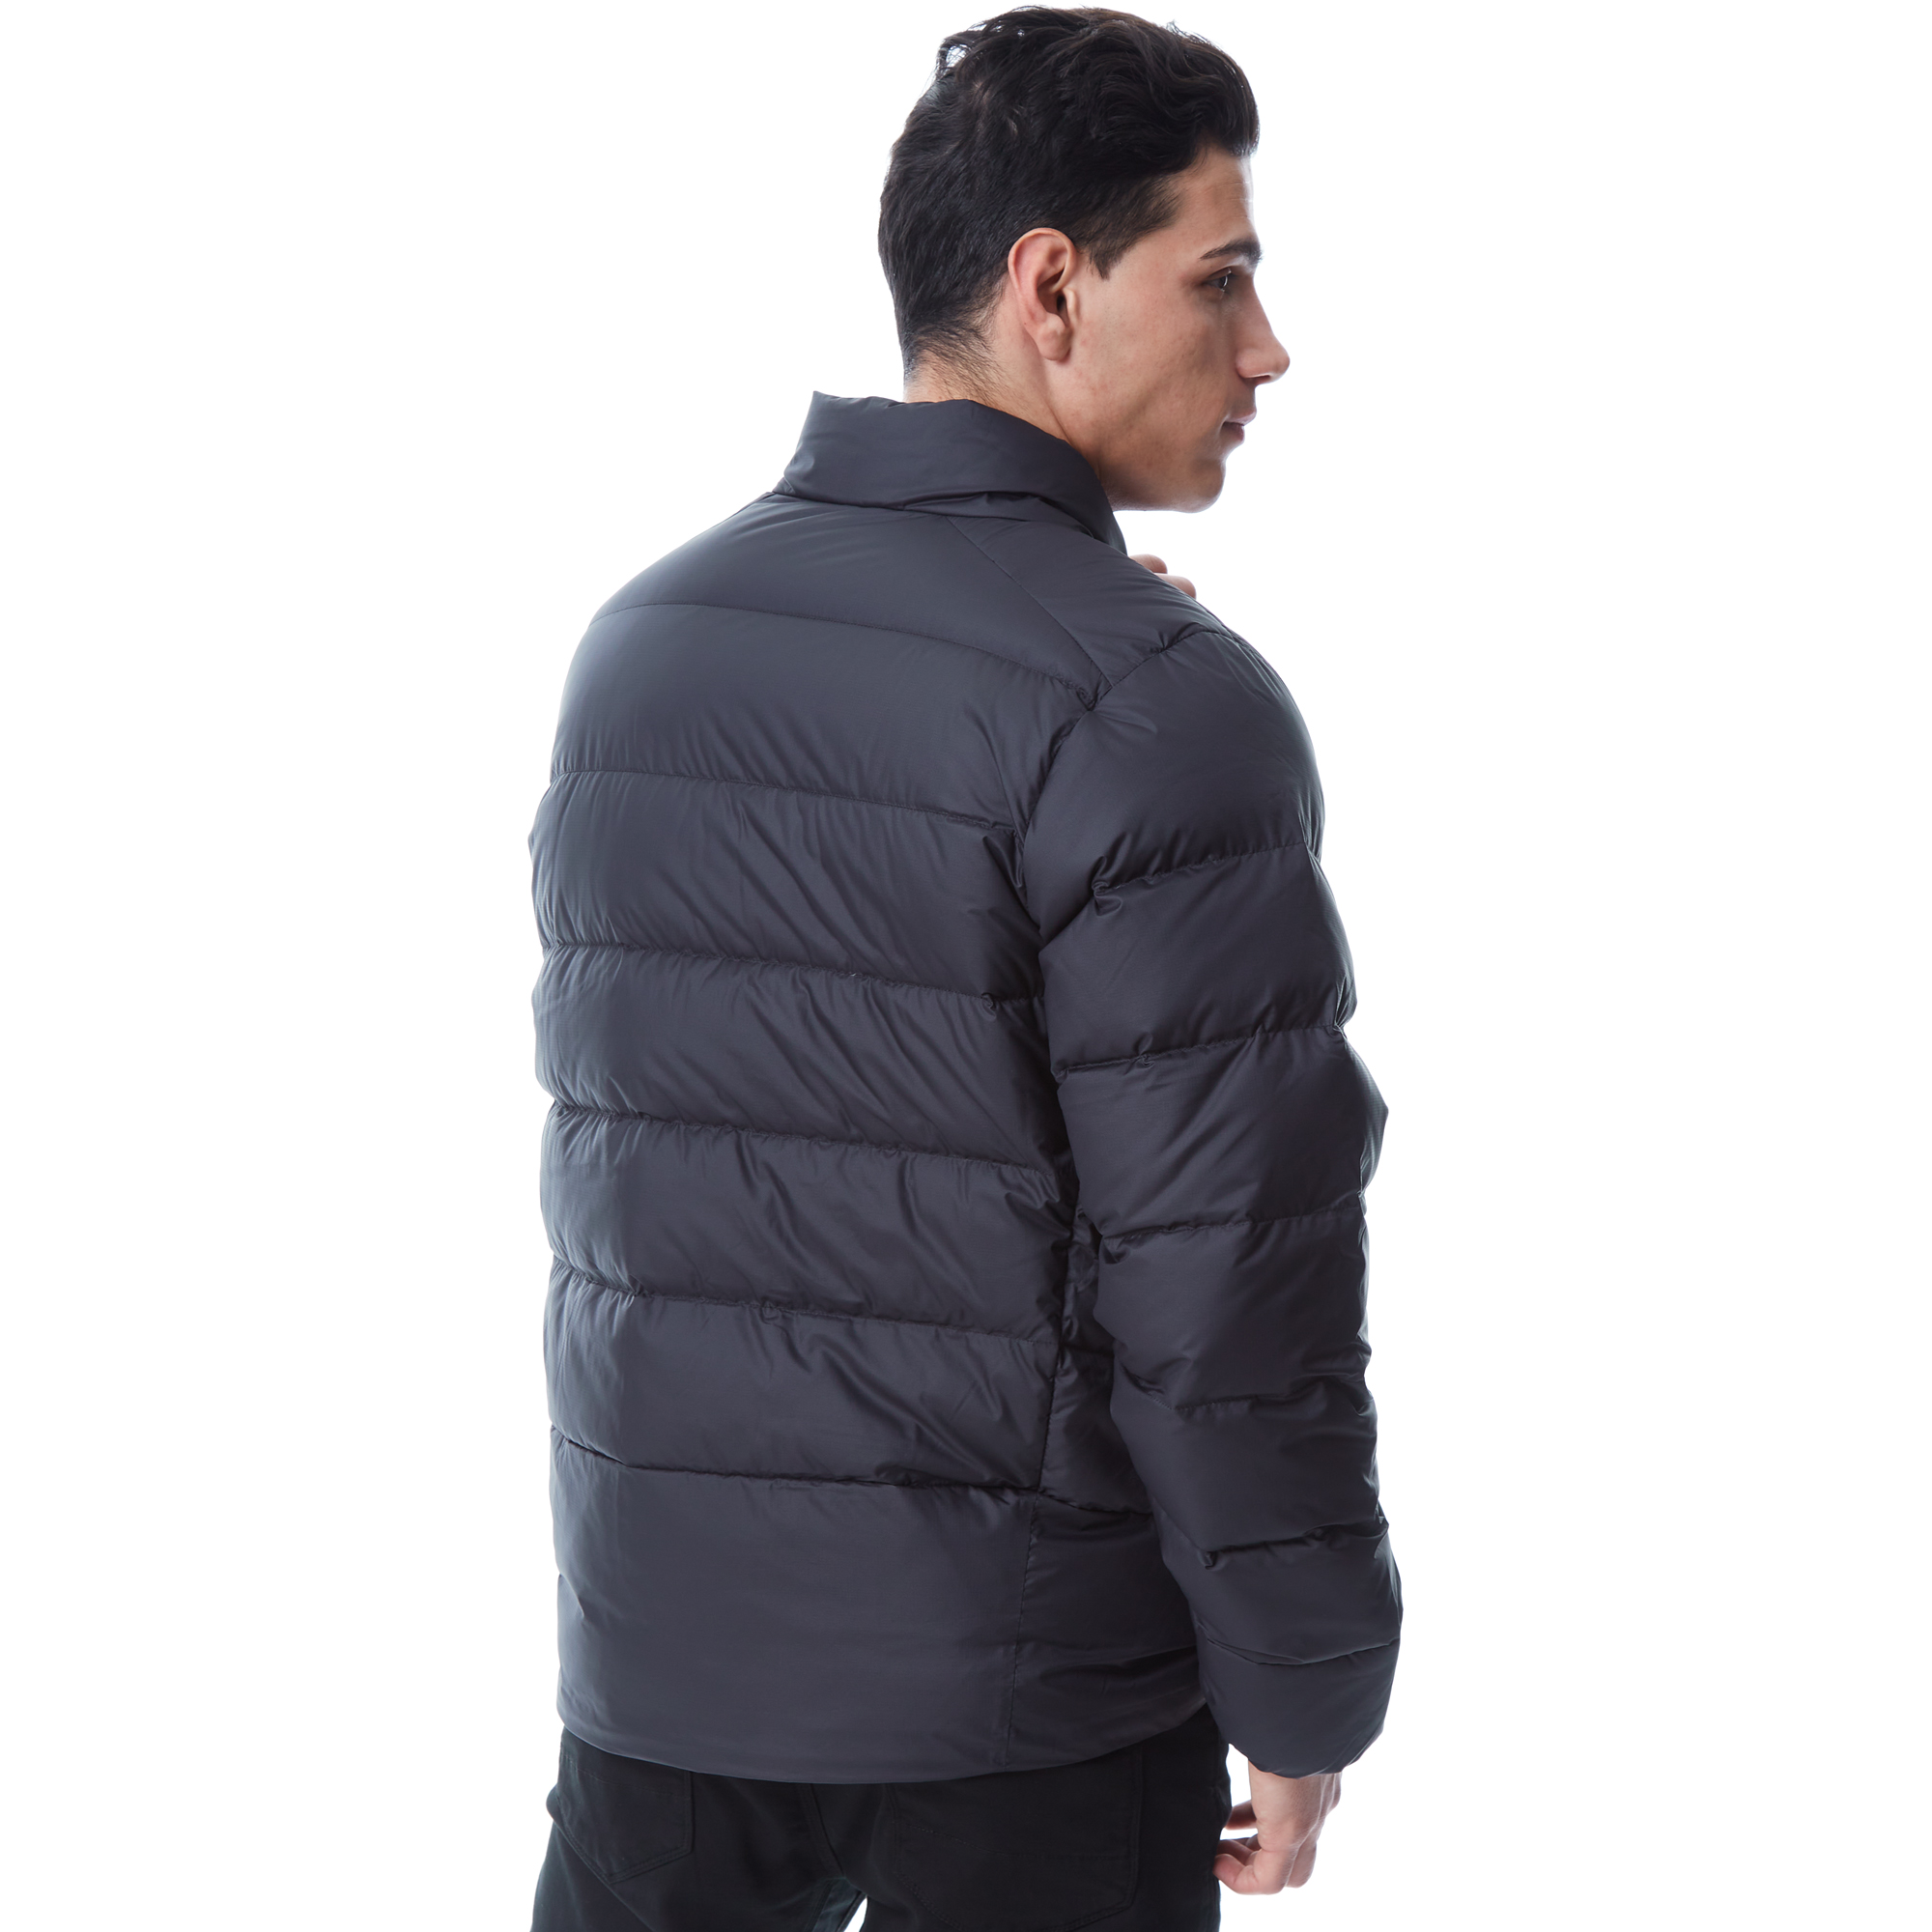 Outdoor Research Coldfront Down Jacket Insulated Jacket